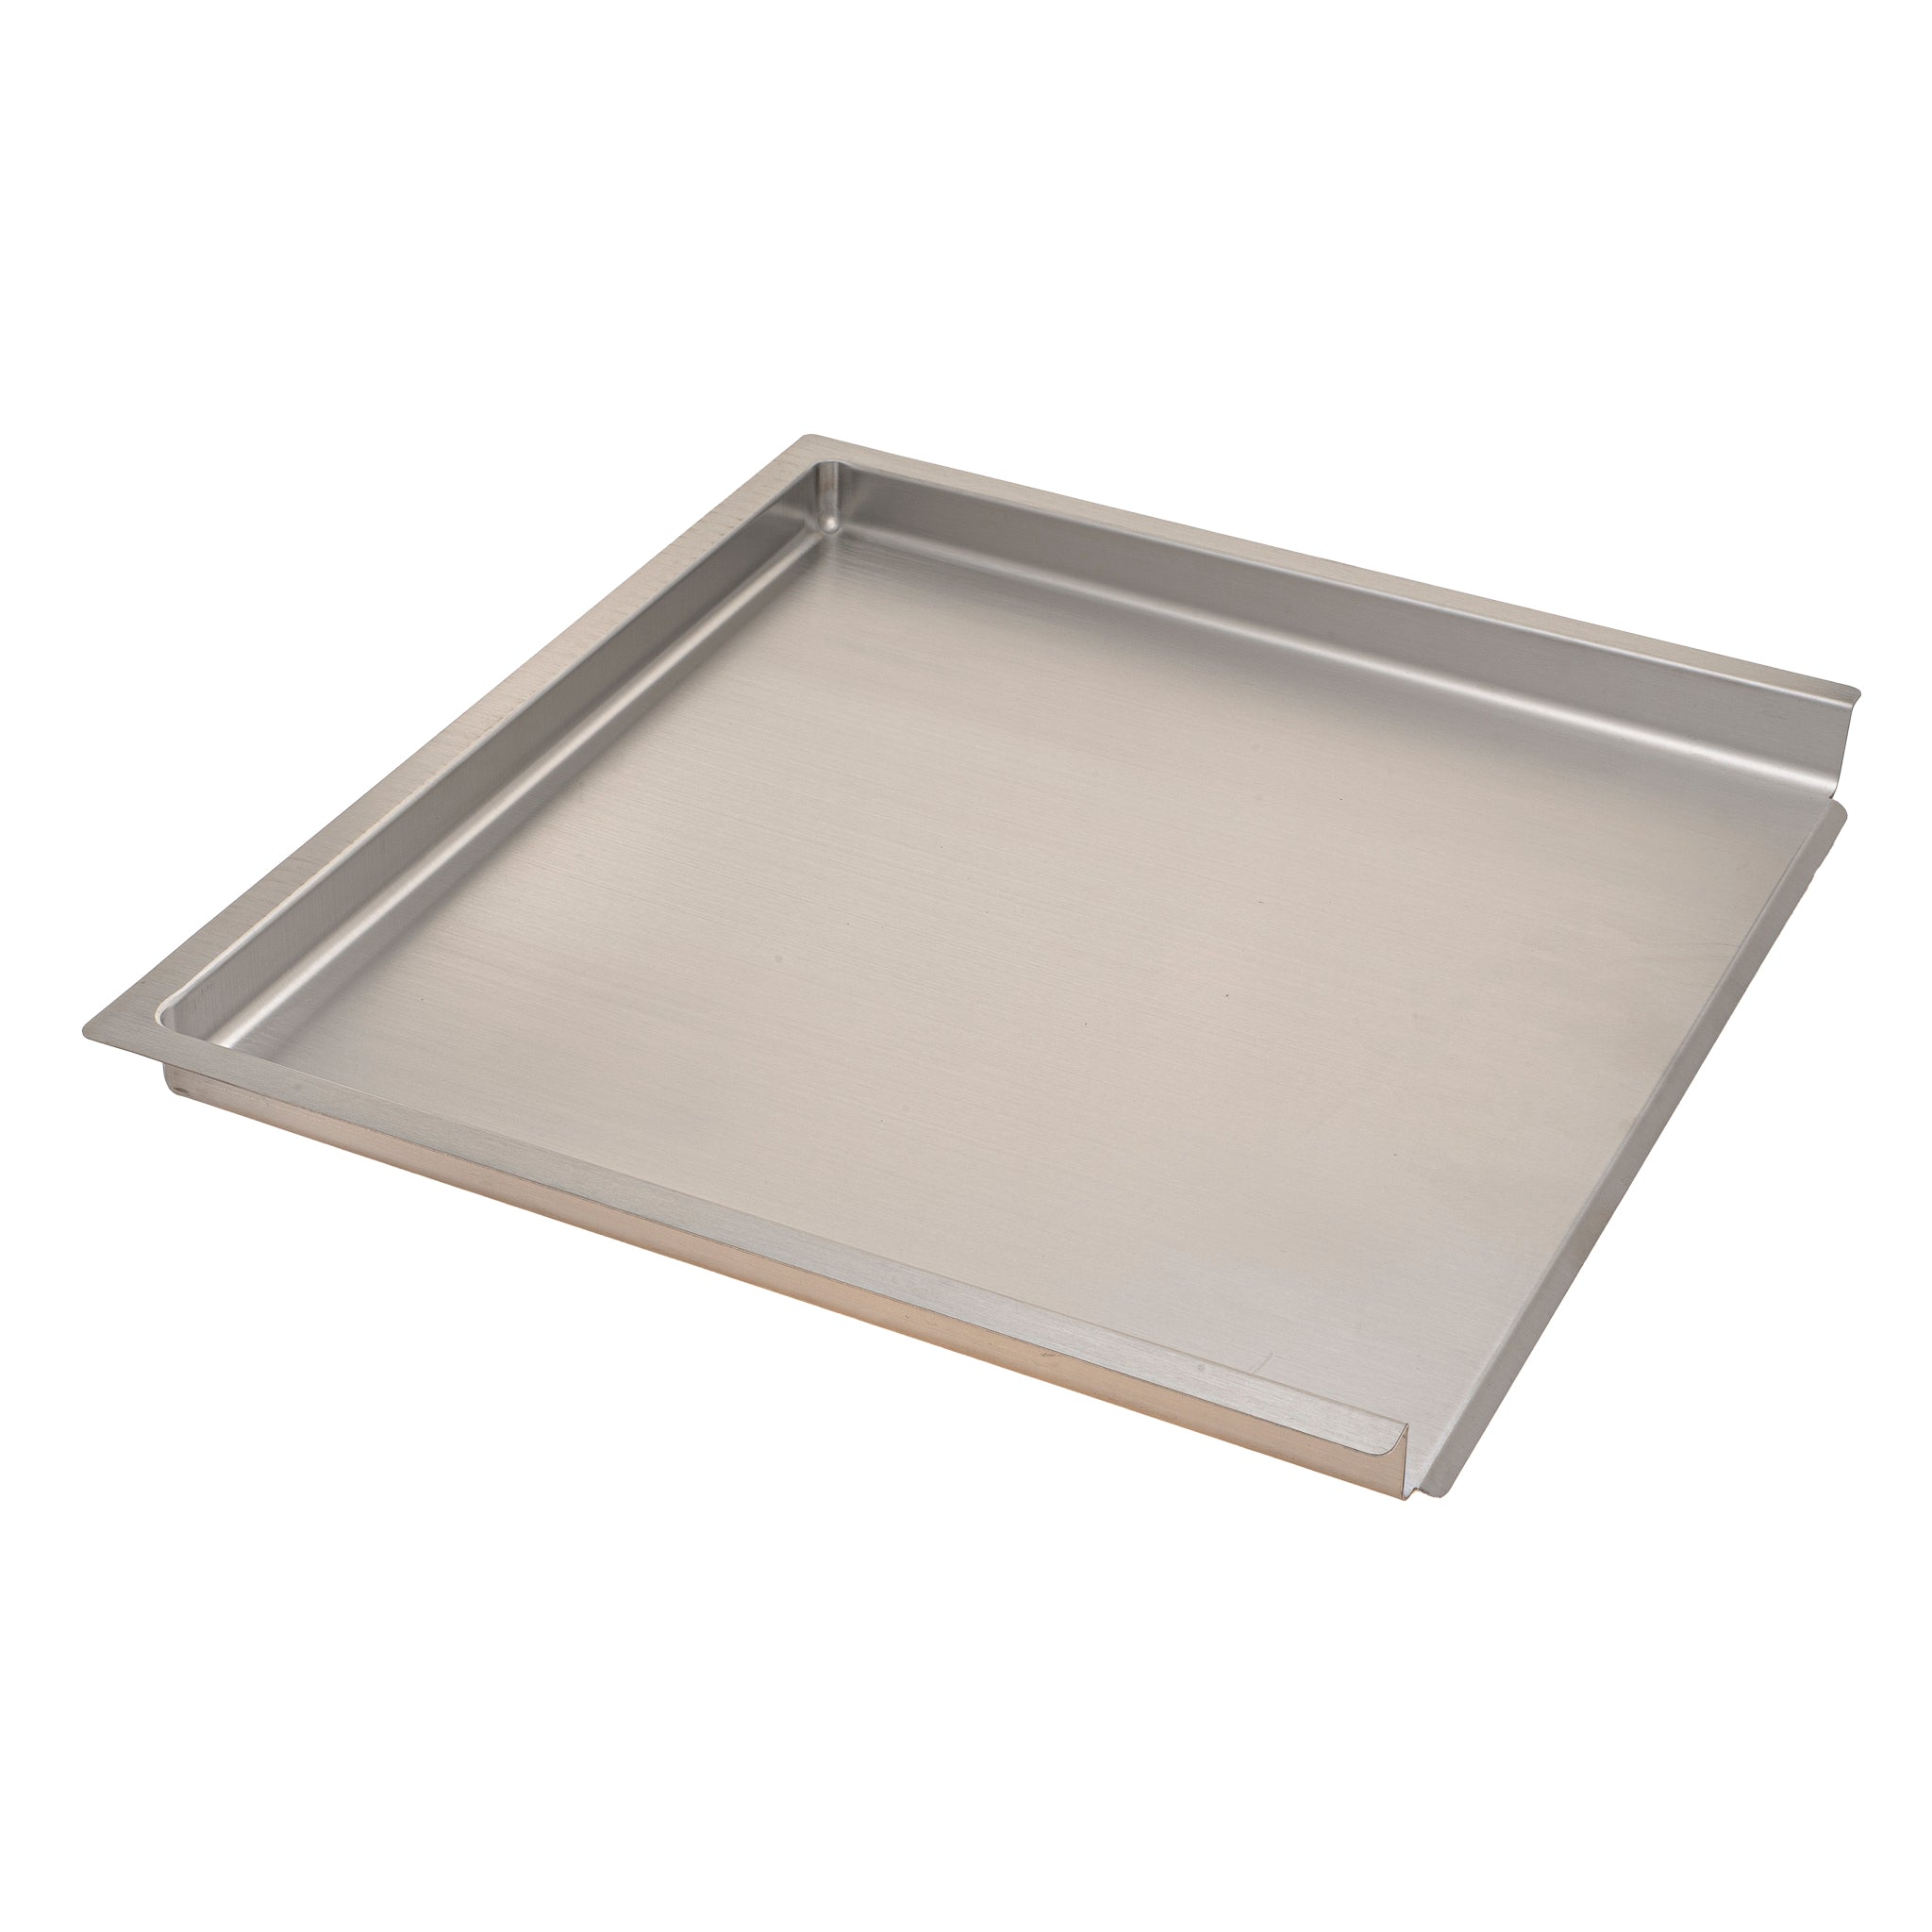 Retto Stainless Steel Drain Tray 395mm x 425mm, Brushed SS Nickel